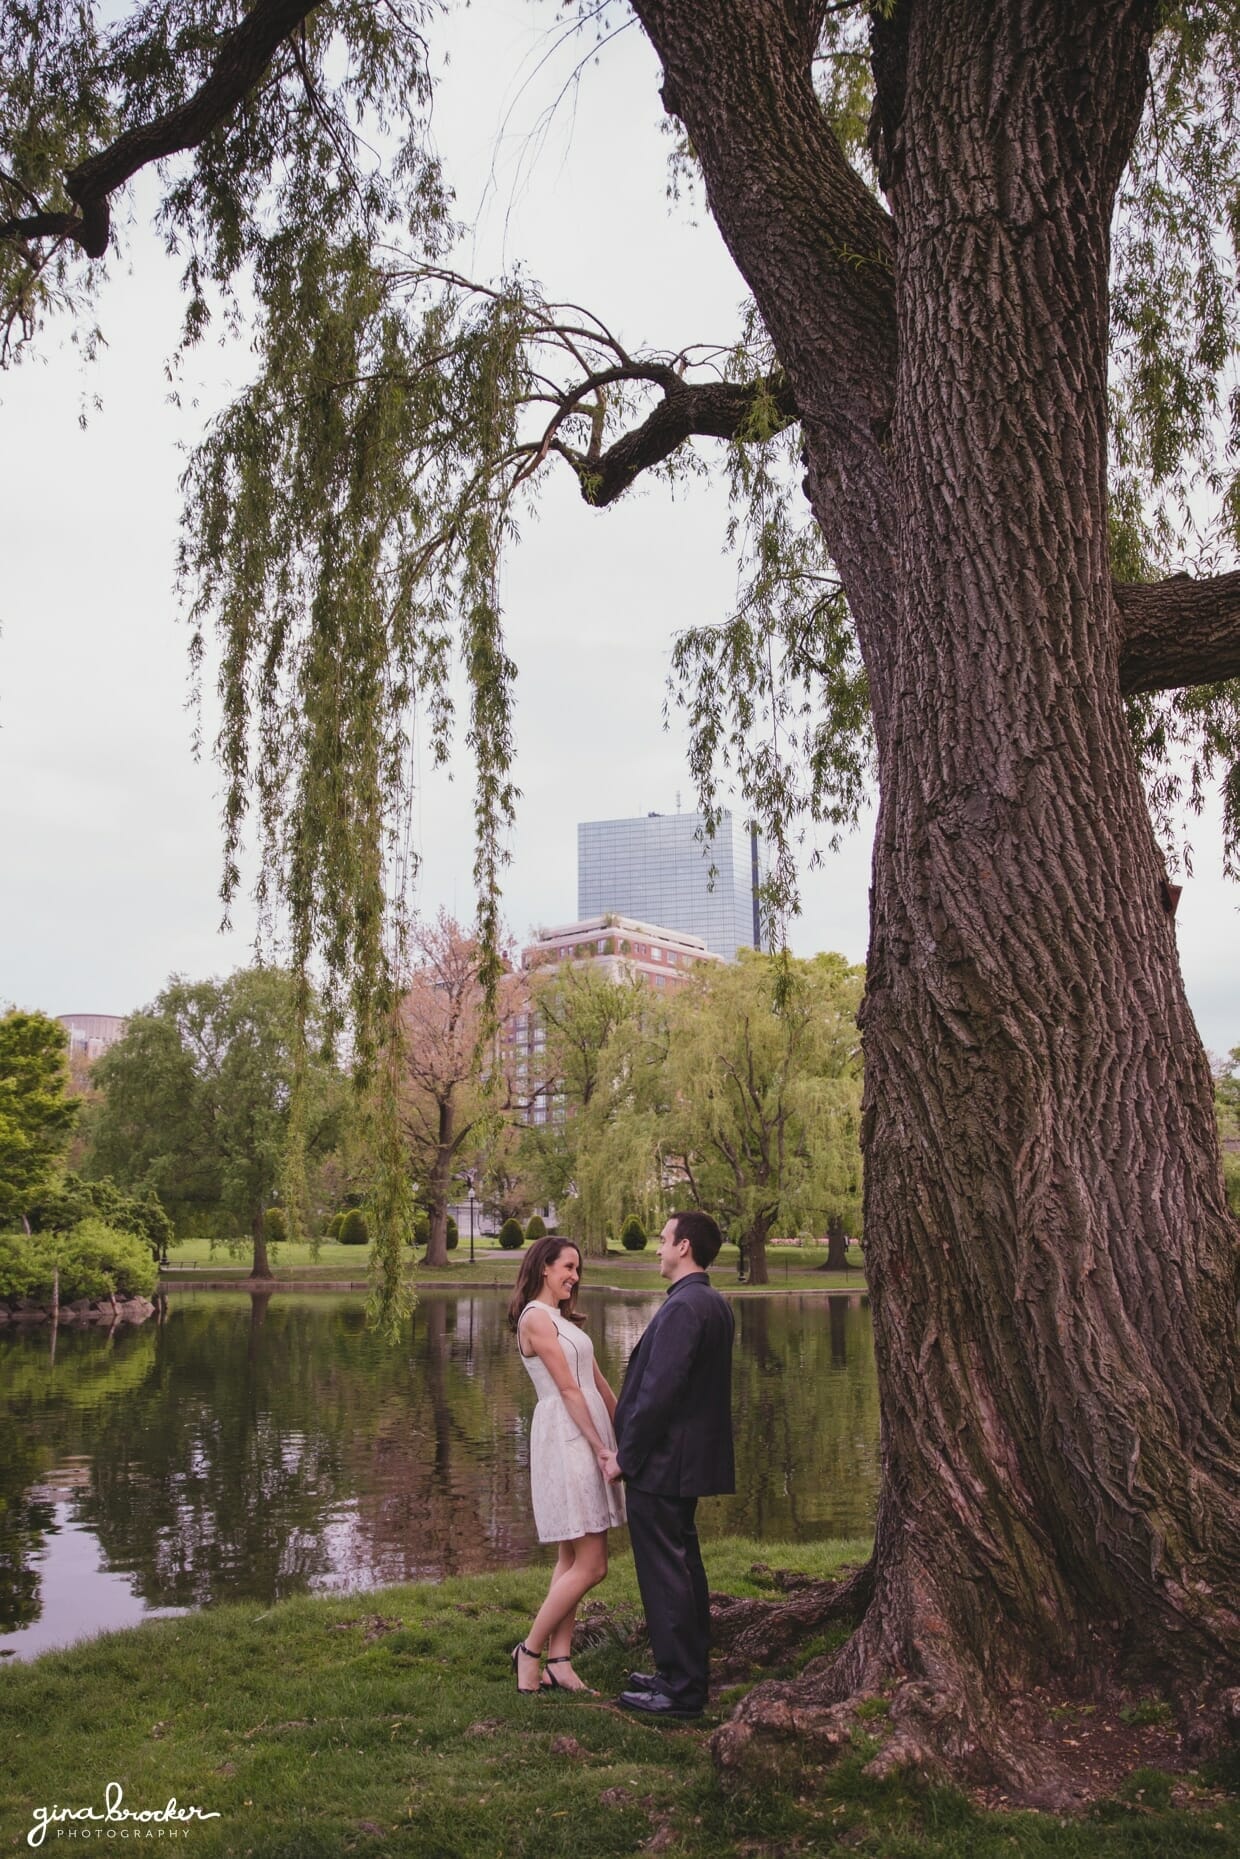 A couple laugh together during their sweet engagement session in the Boston Public Gardens